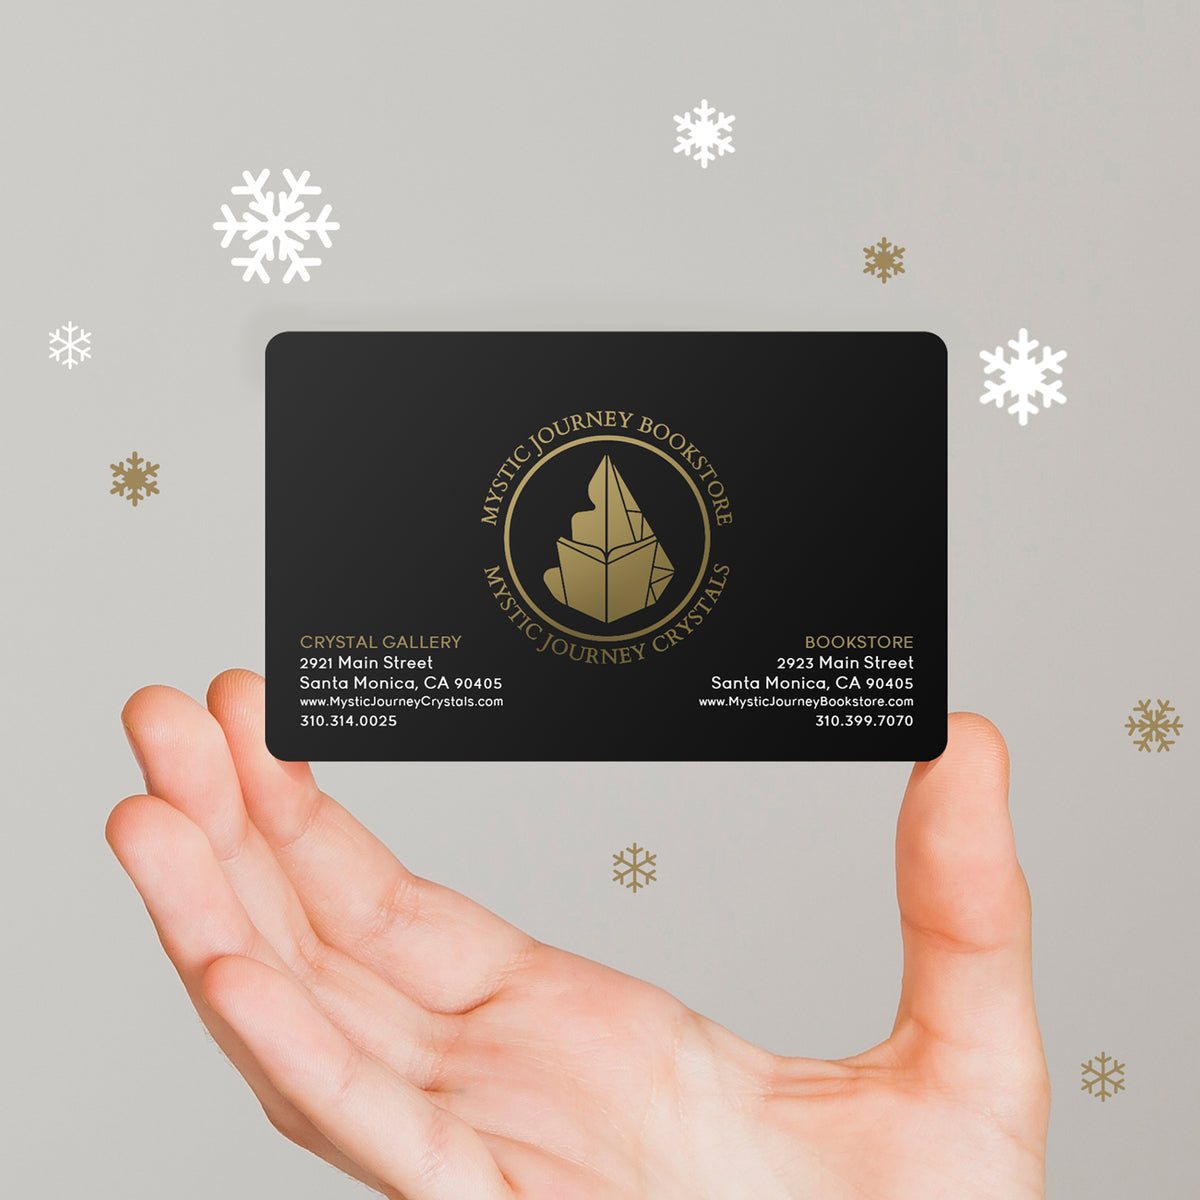 A hand holds up a Mystic Journey Crystals gift card